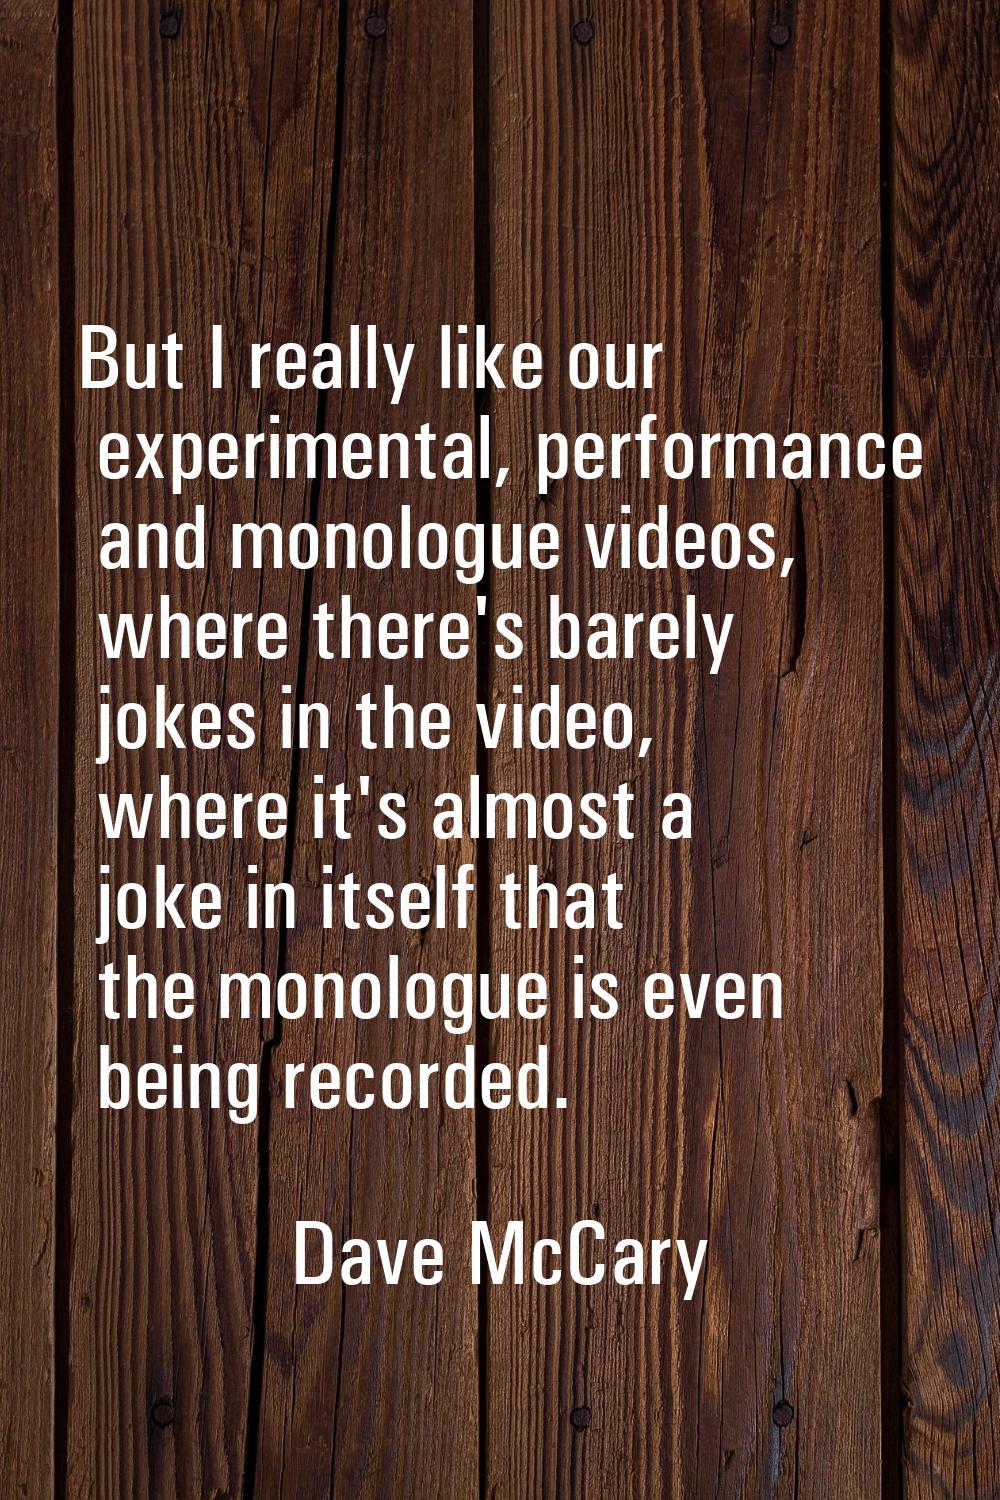 But I really like our experimental, performance and monologue videos, where there's barely jokes in